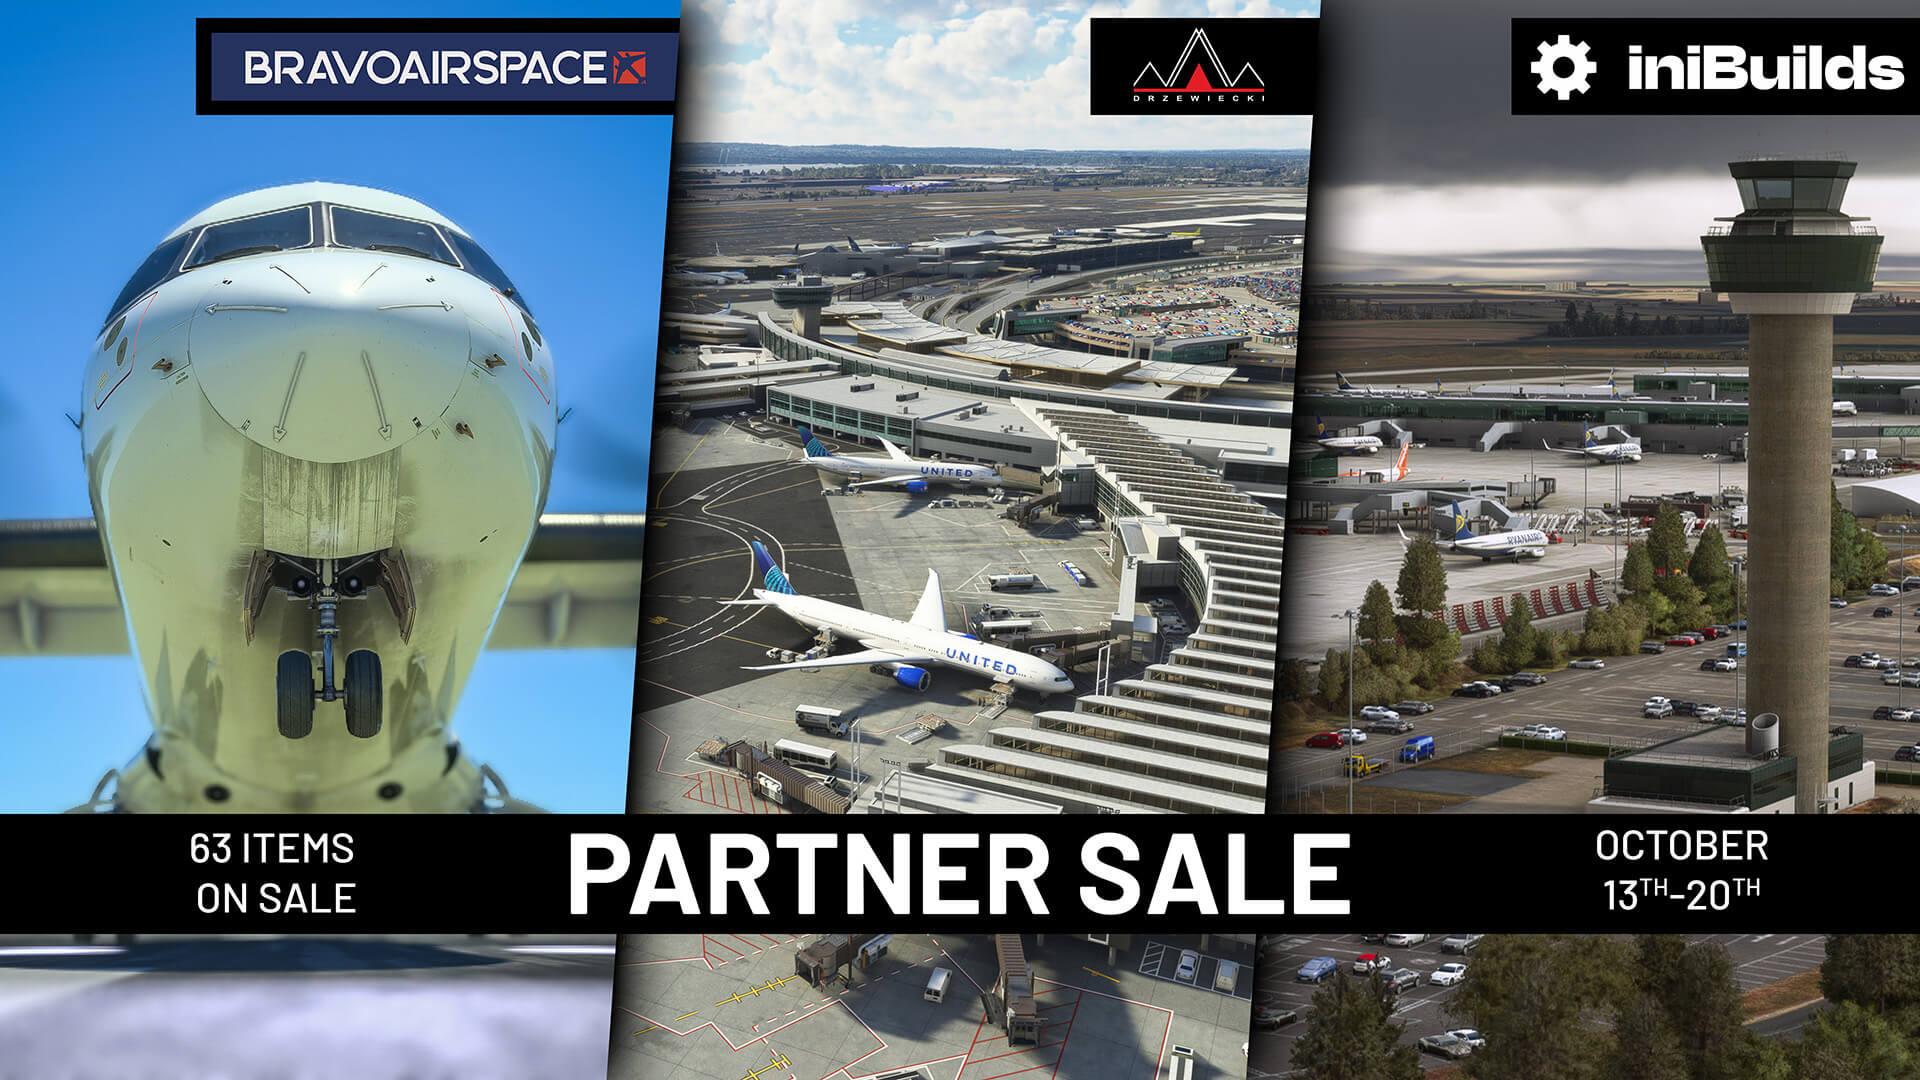 Partner Sale: BravoAirspace, Drzewiecki Design, and iniBuilds. 63 Items on sale, runs from October 13th to 20th.